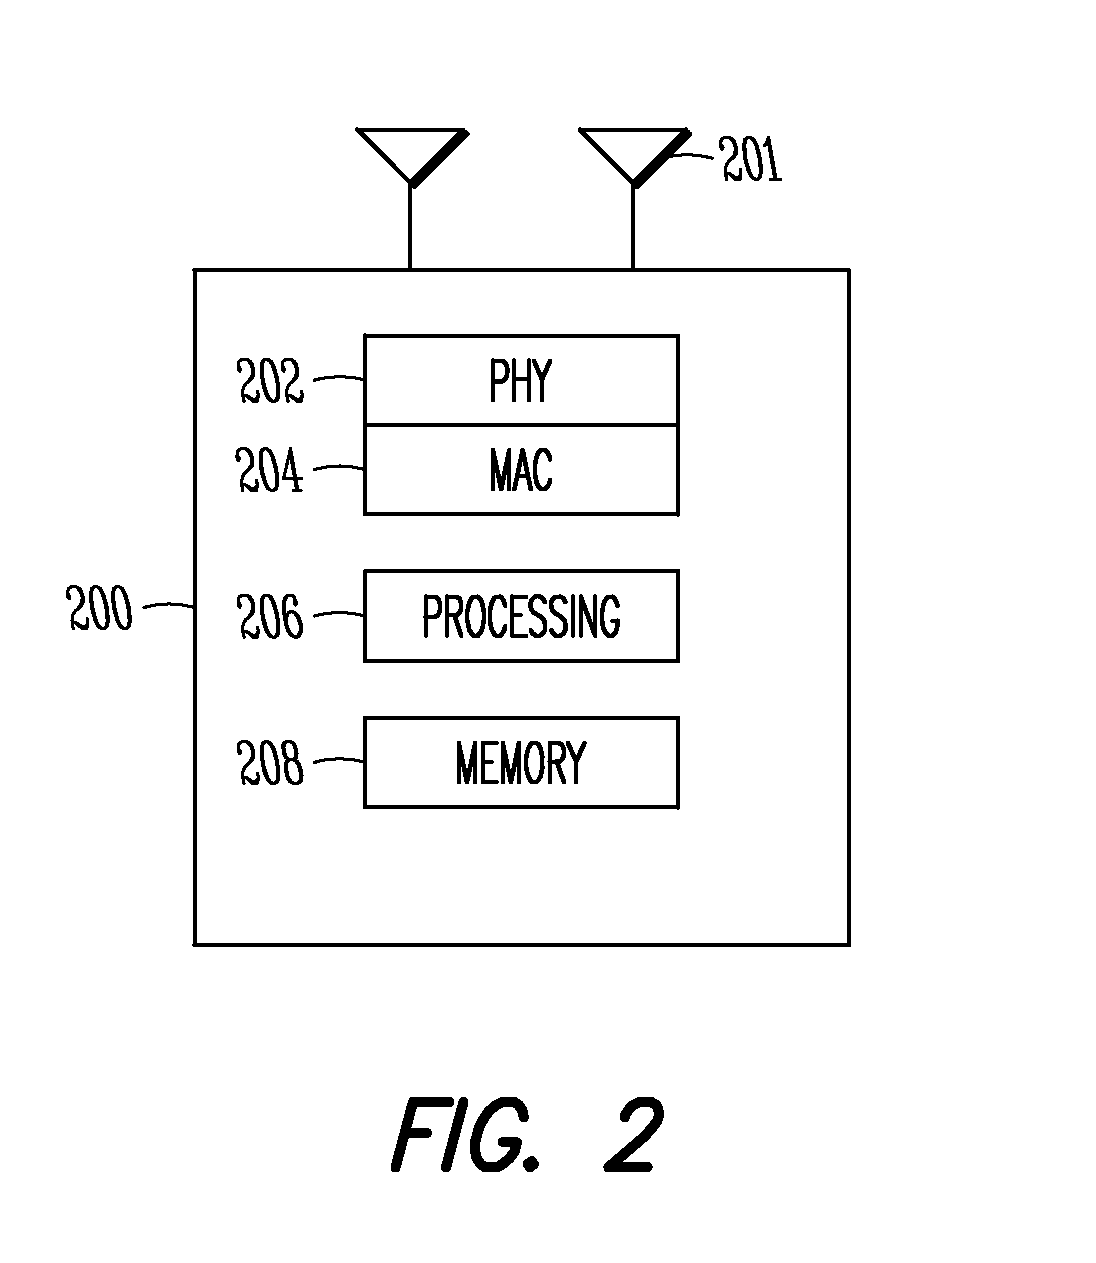 Coverage constrained devices and paging method